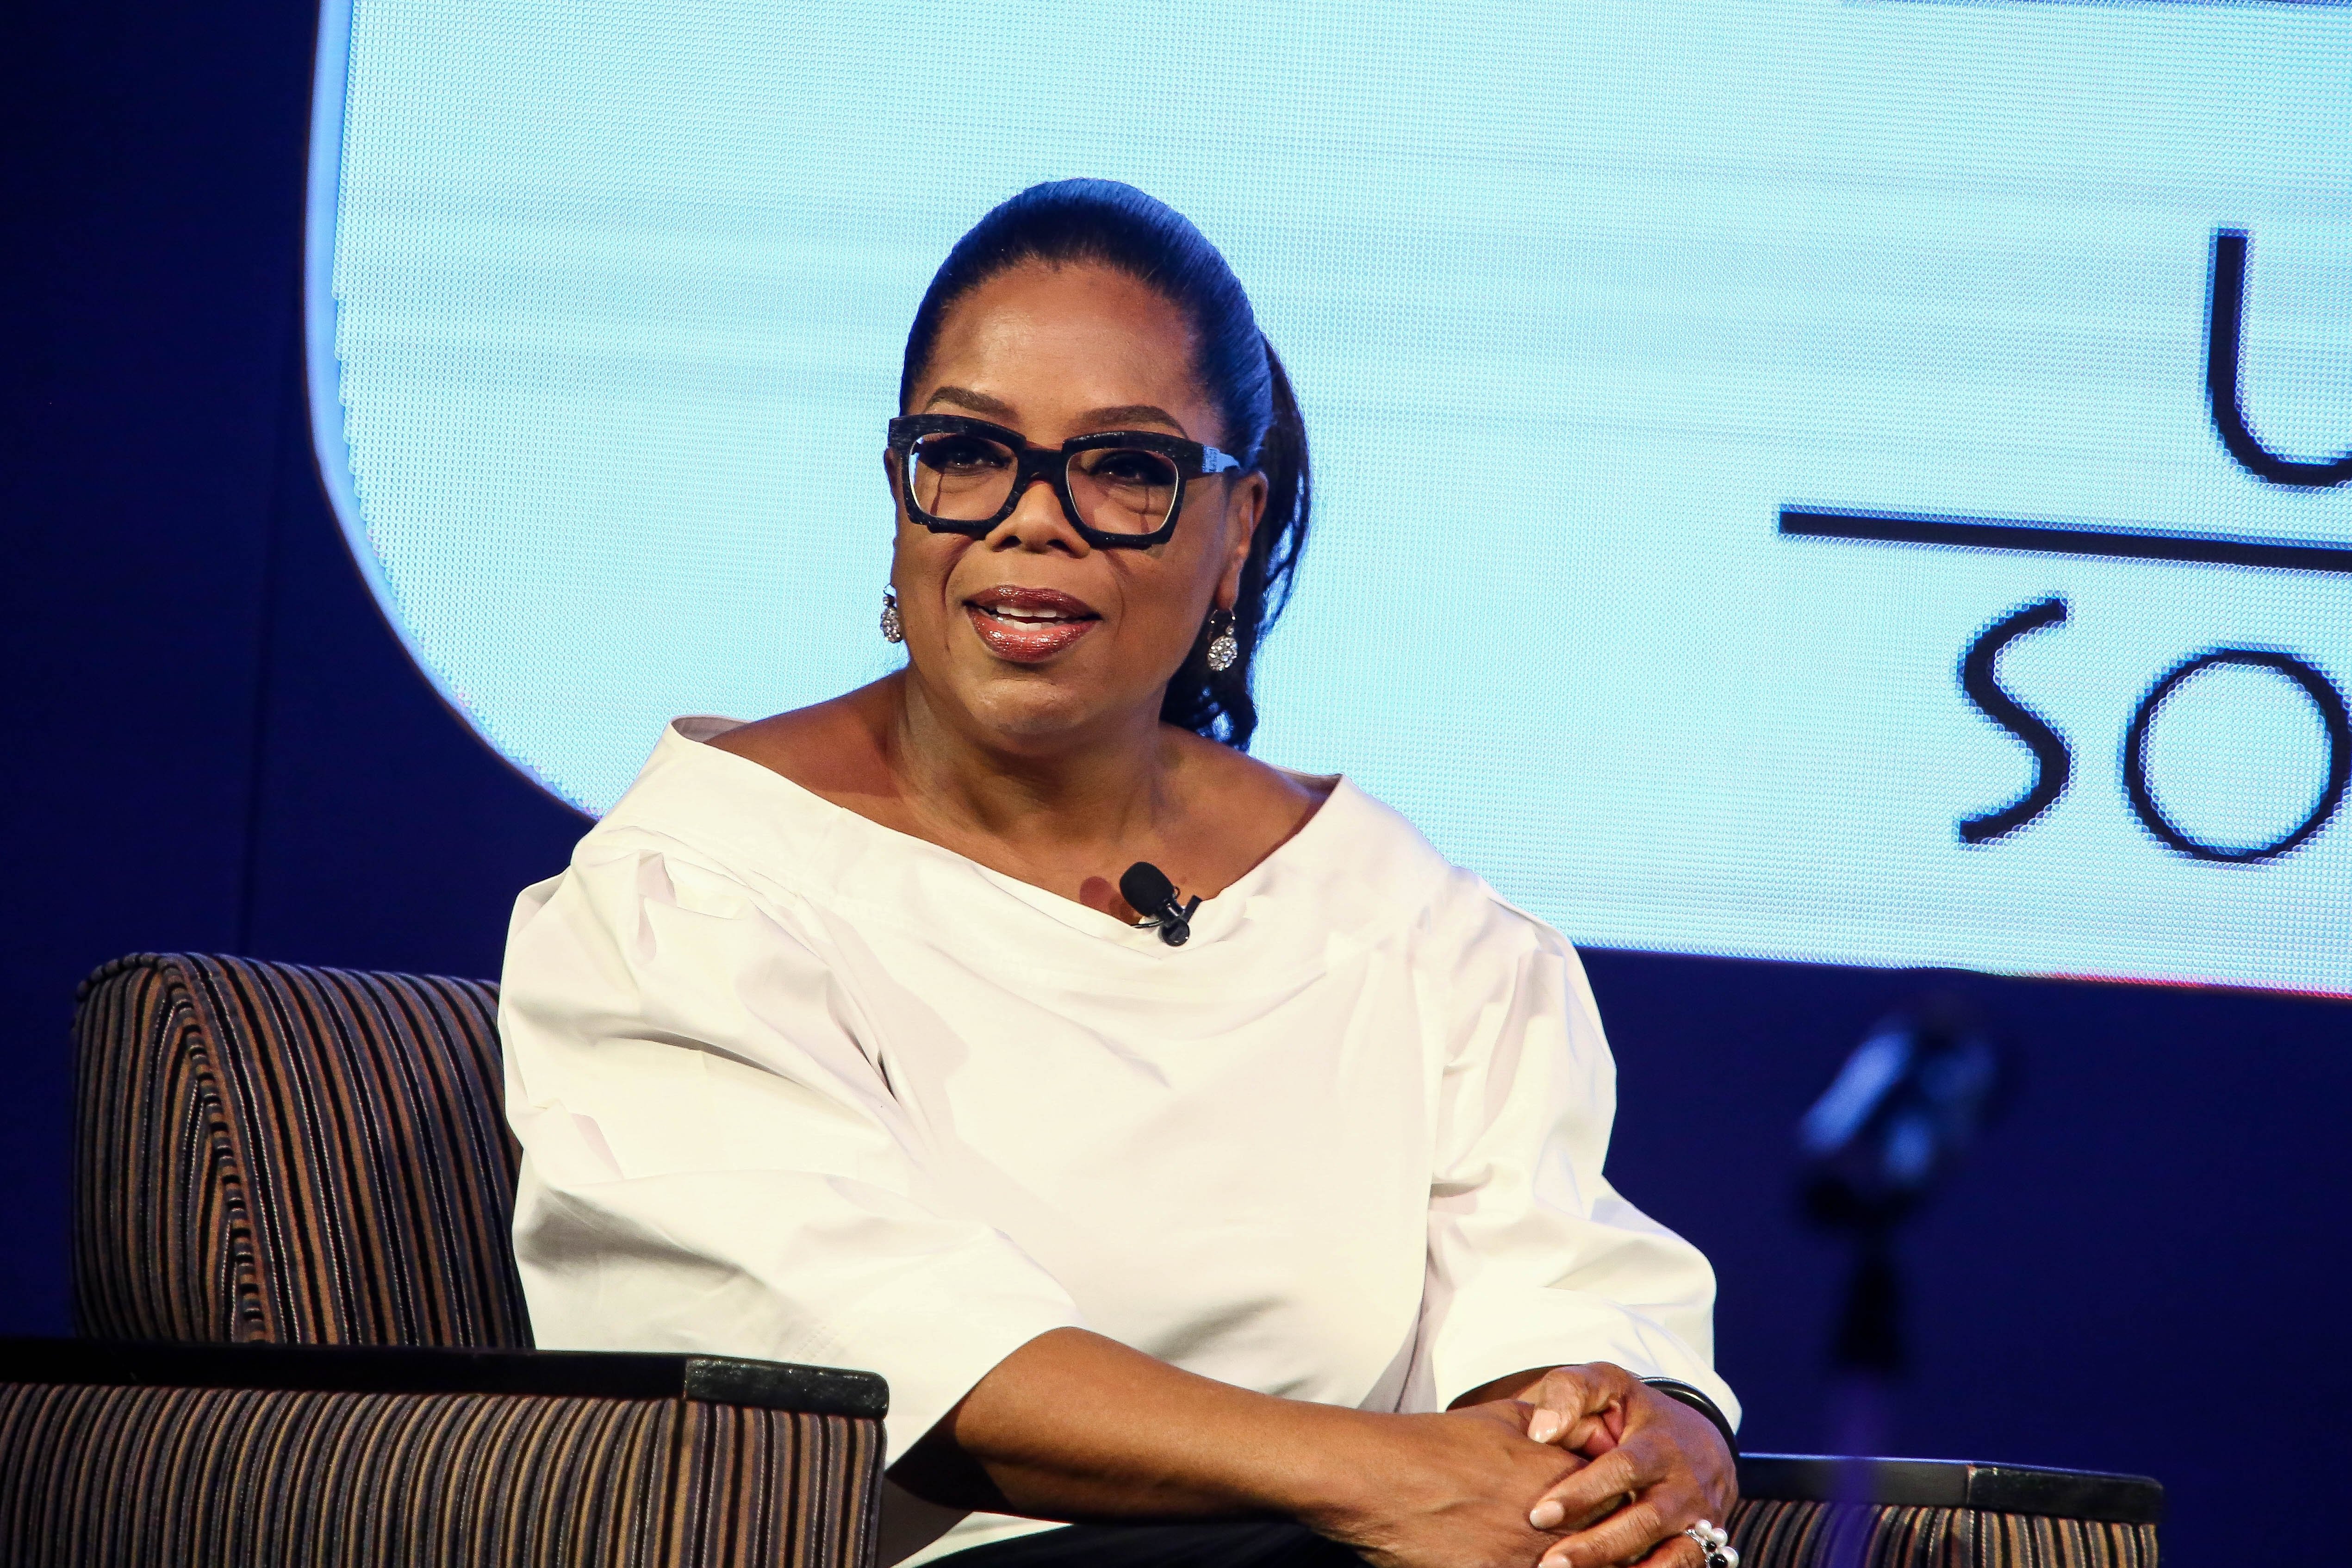  American talkshow host Oprah Winfrey speaks during a Dreams programme event at the Premier Hotel in OR Tambo Airport on December 02, 2016 in Johannesburg, South Africa. | Source: Getty Images